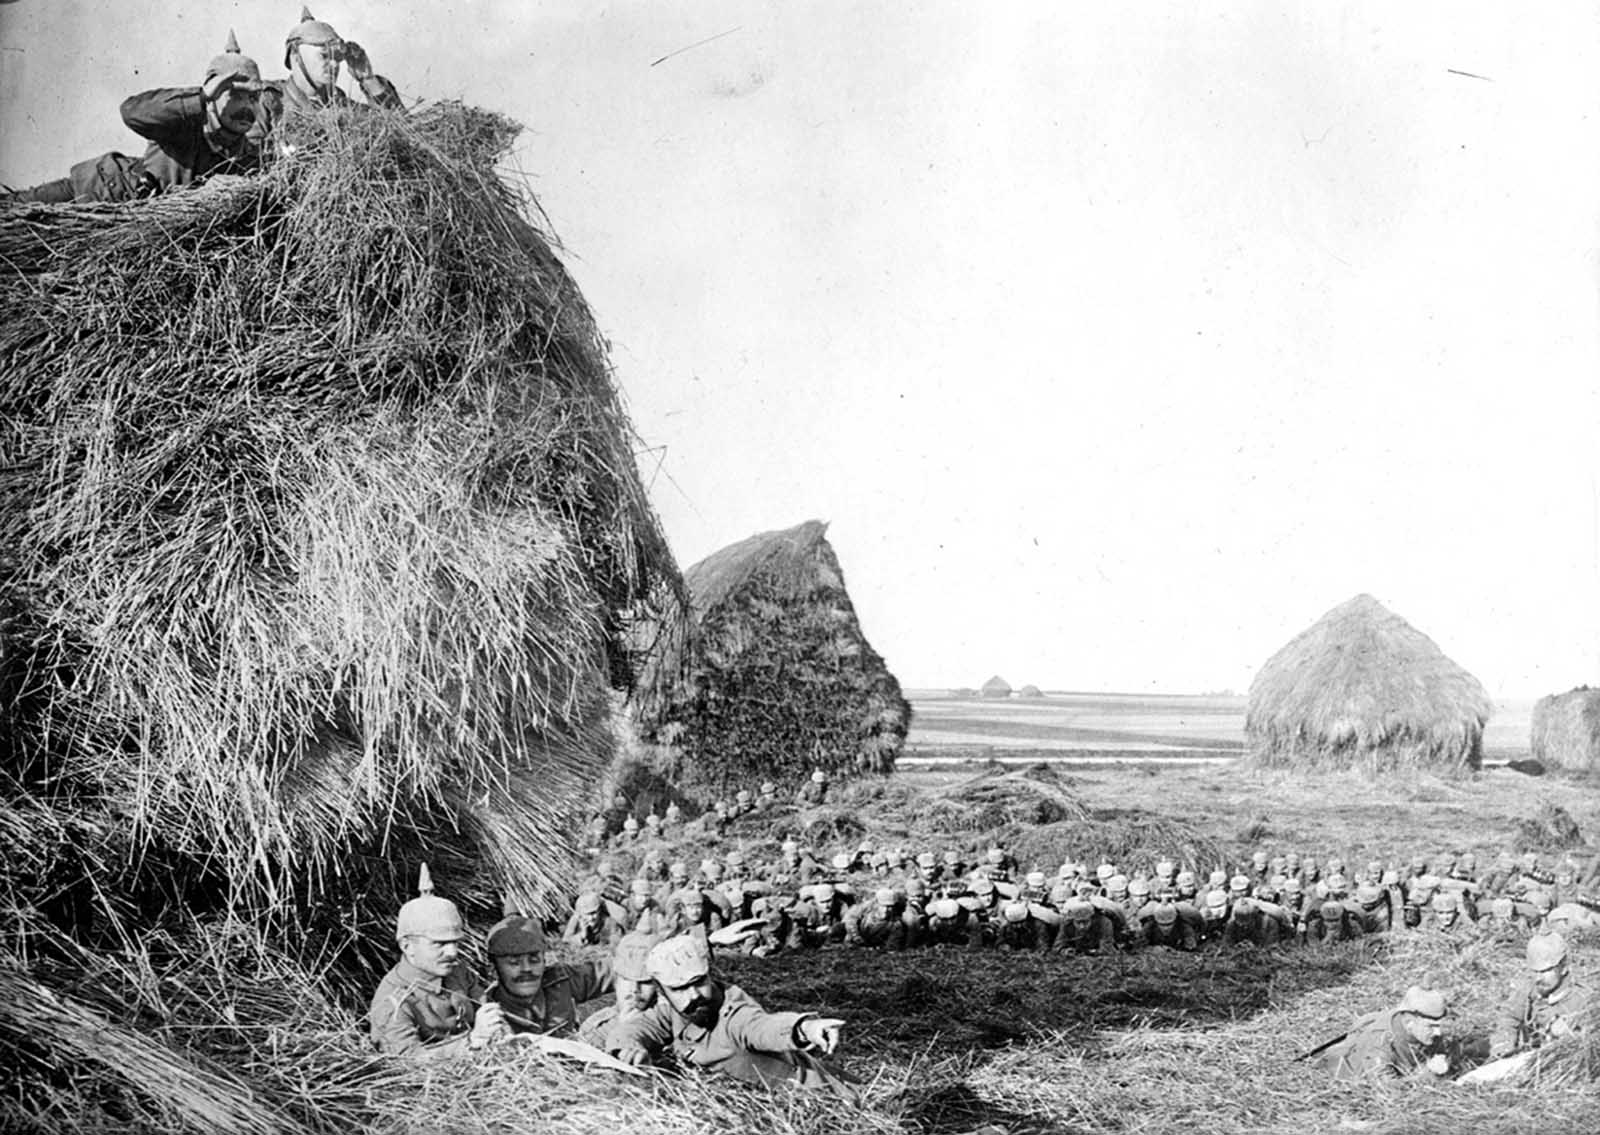 German soldiers make observations from atop, beneath, and behind large haystacks in southwest Belgium, ca. 1915.